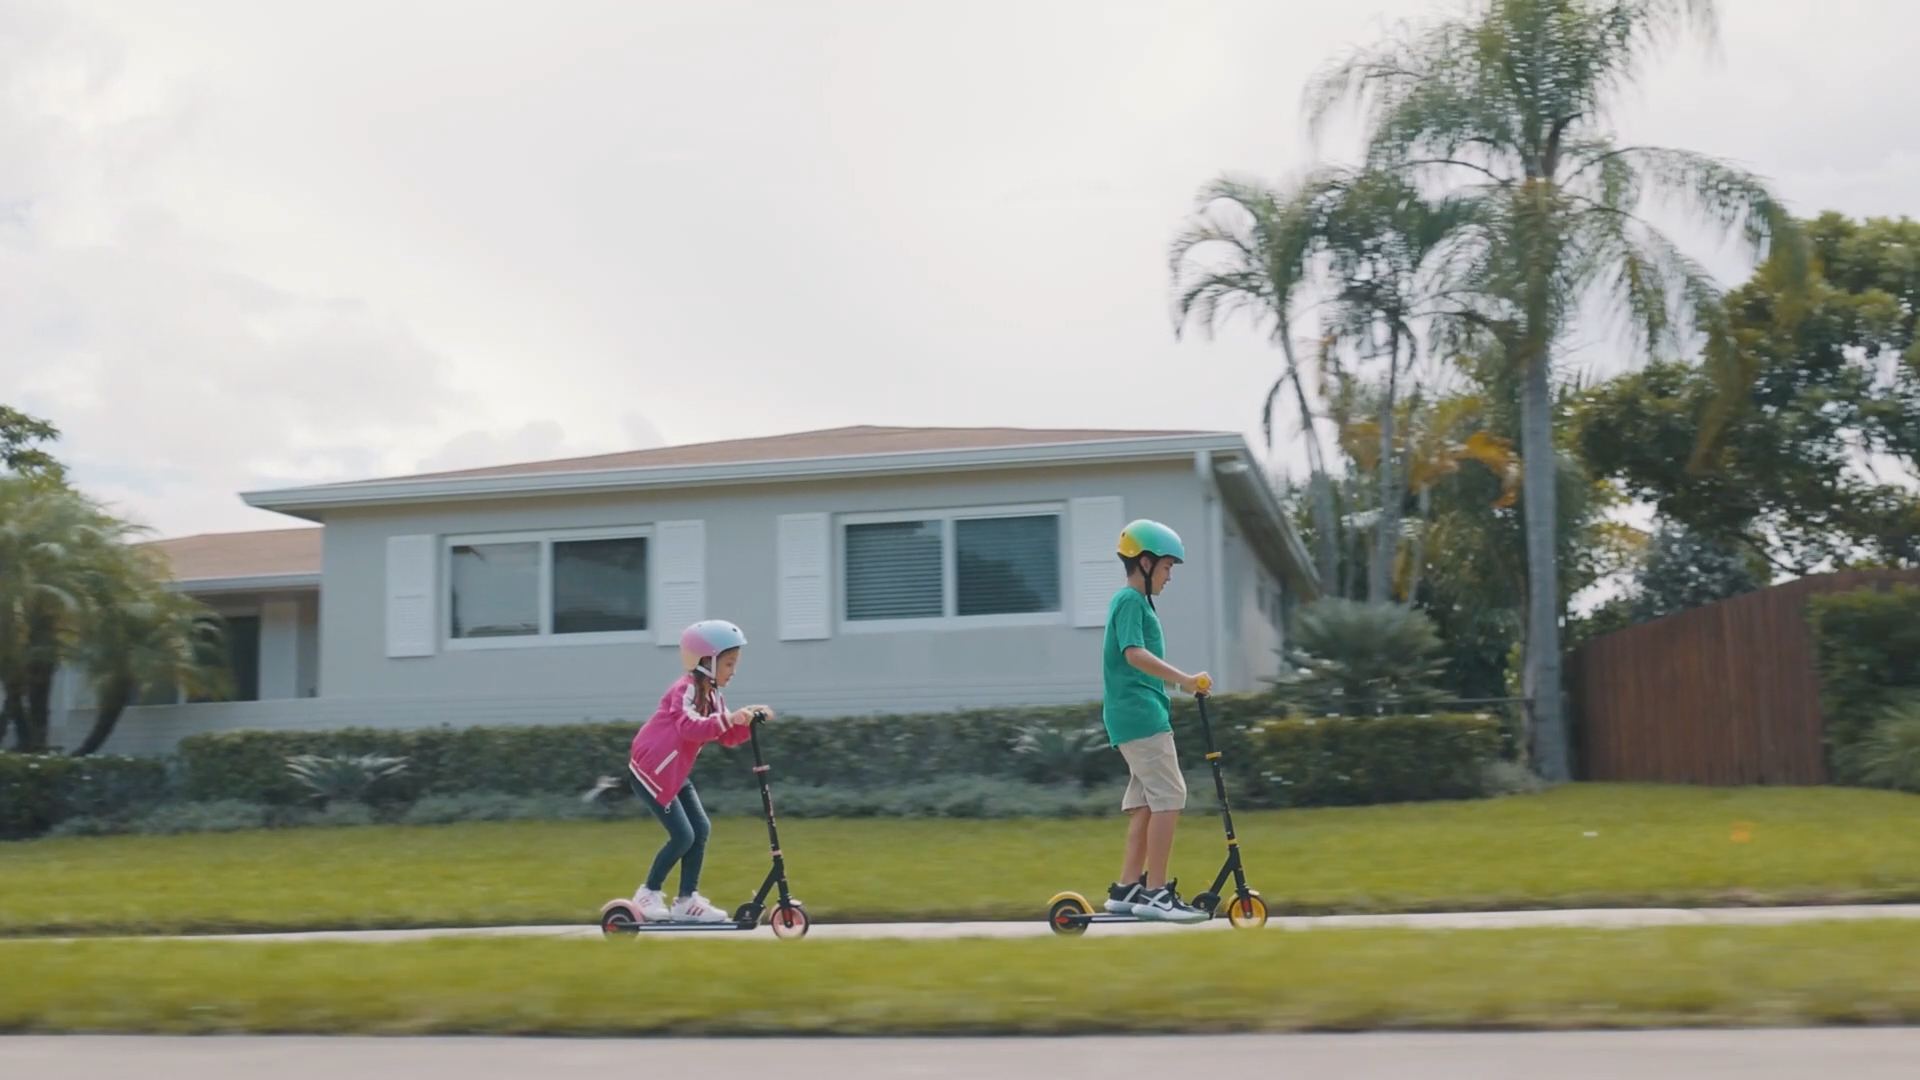 FanttikRide T9 Apex Electric Scooter for Teens